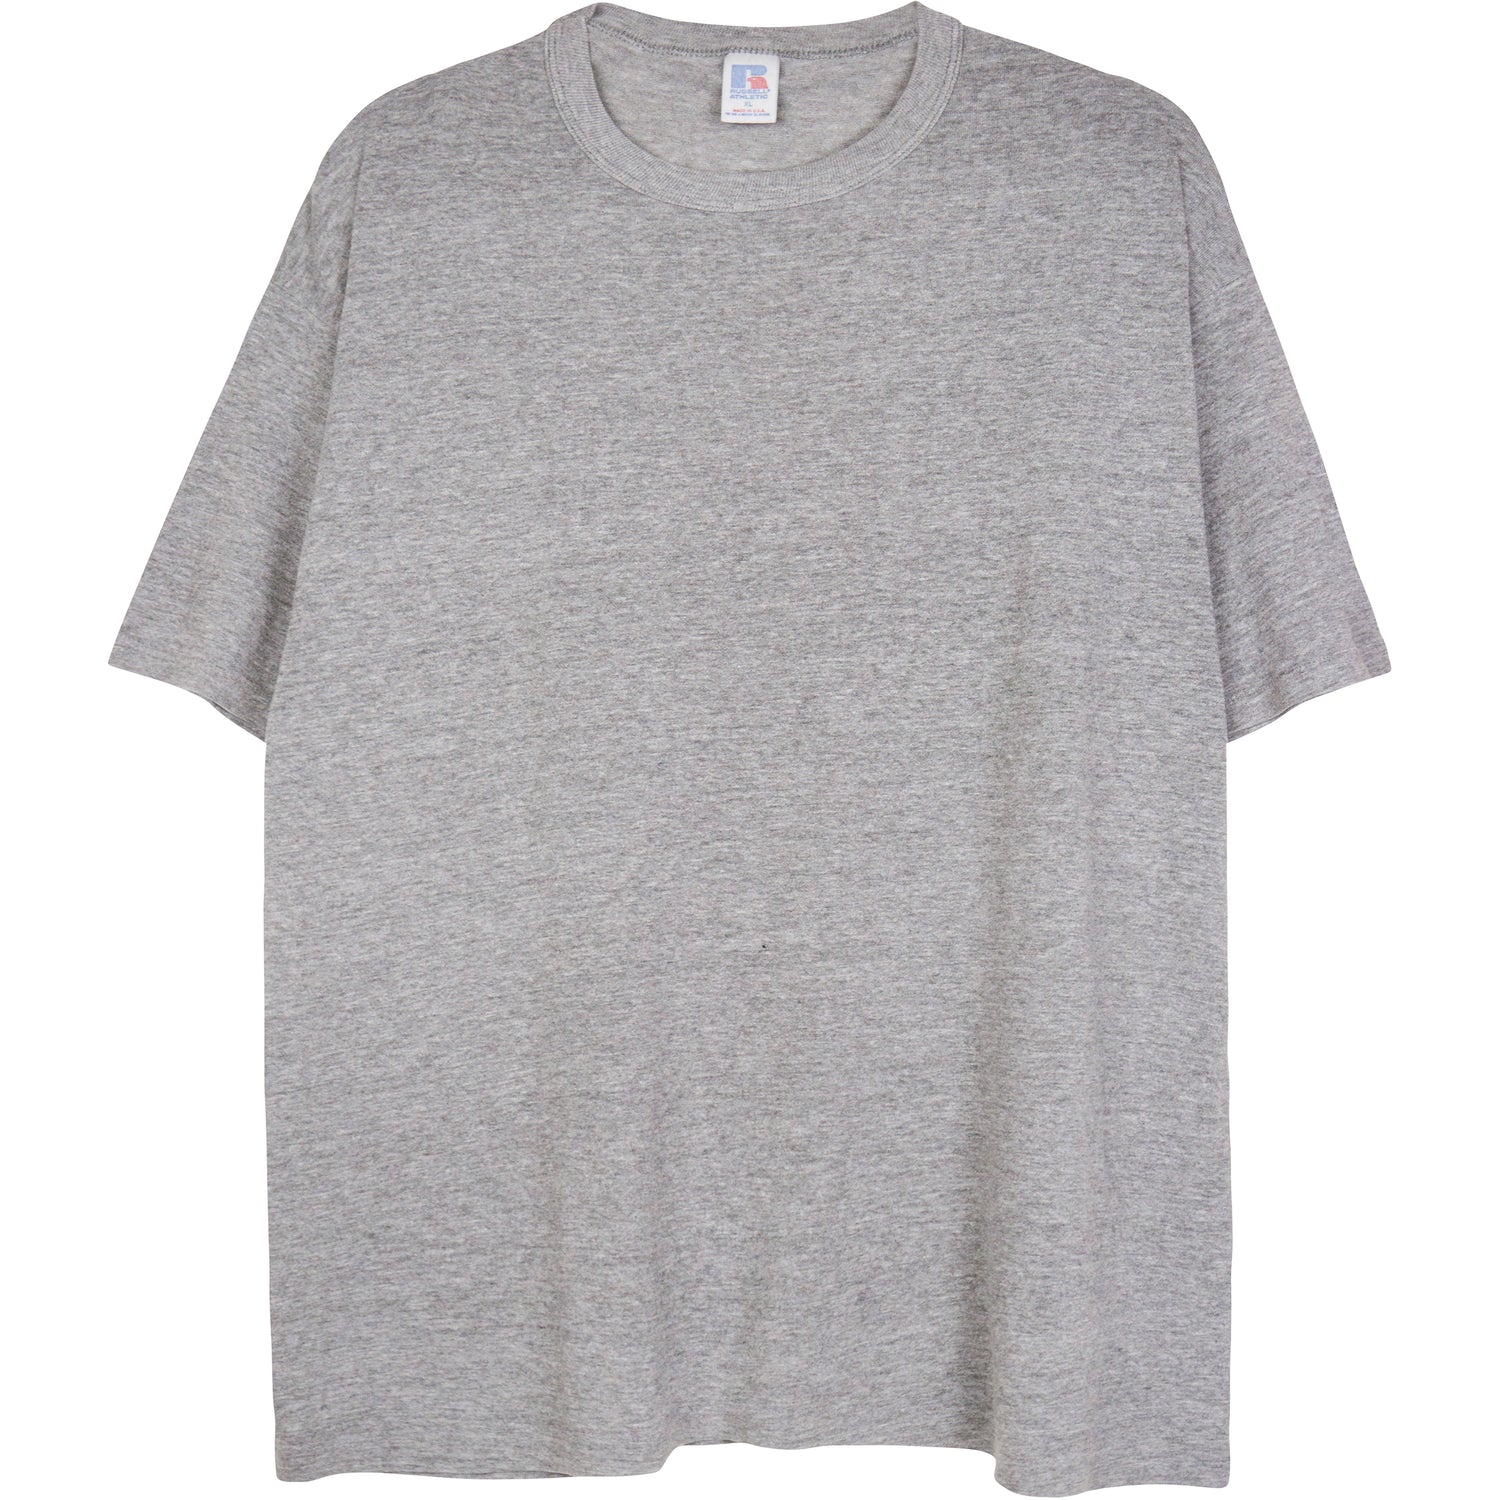 VINTAGE HEATHER GREY RUSSELL ATHLETIC T-SHIRT